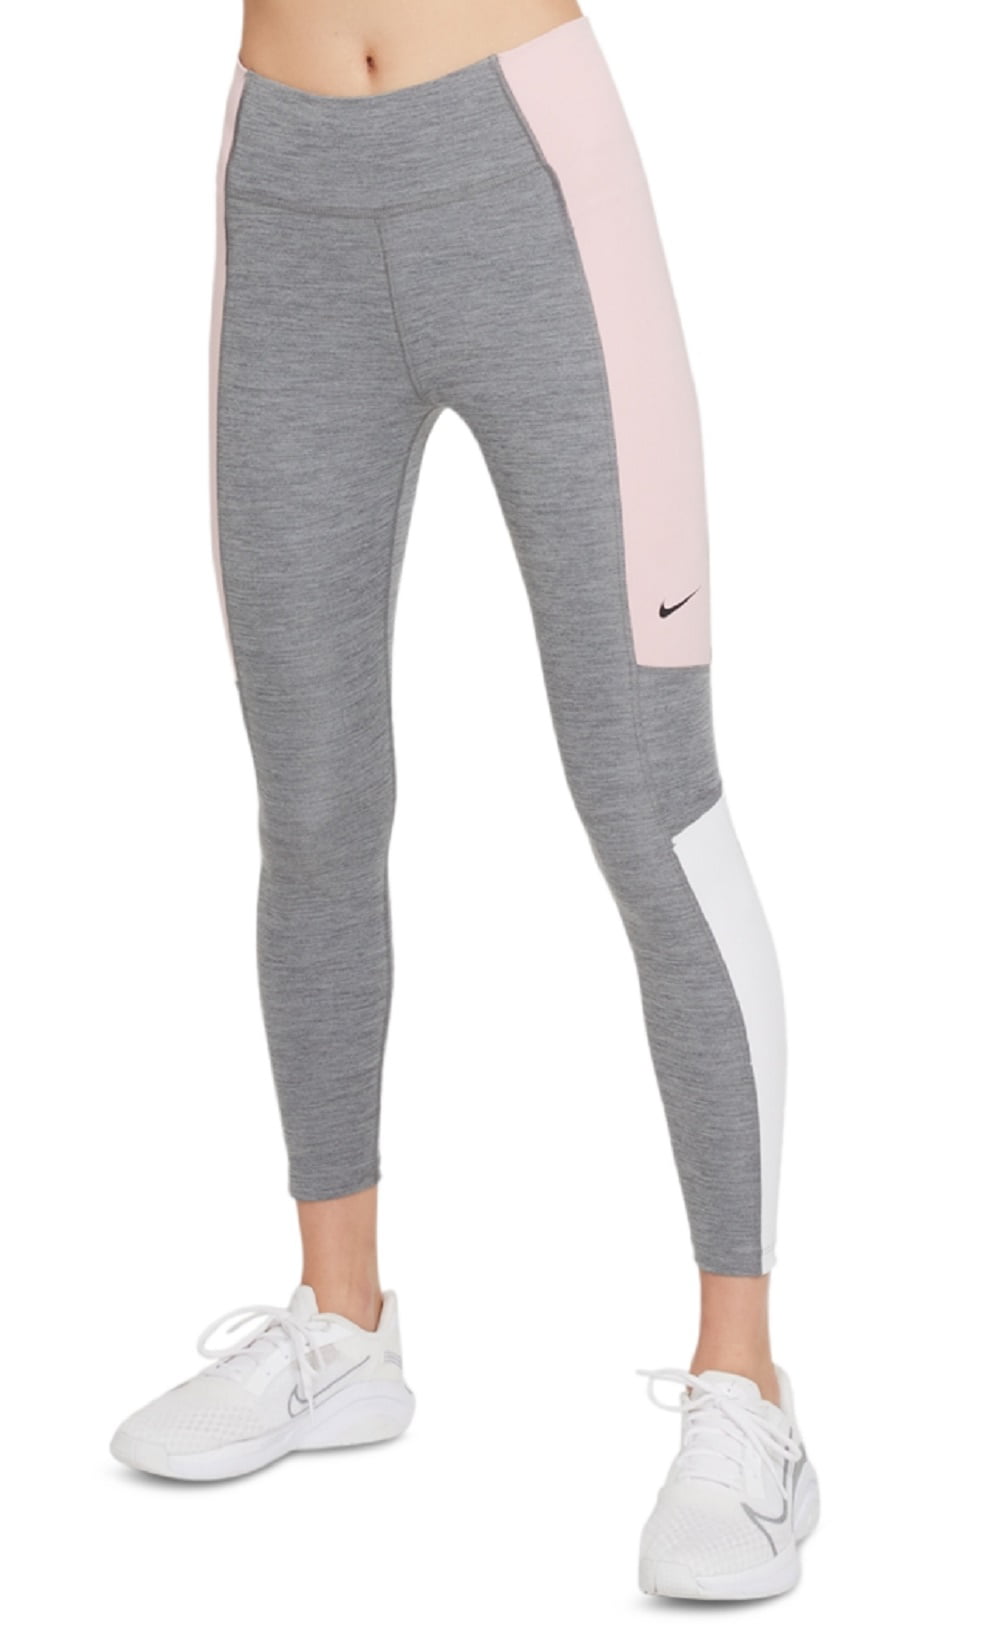 Nike Women's Color Block Mid Rise 7/8 Tights Gray Size 3X